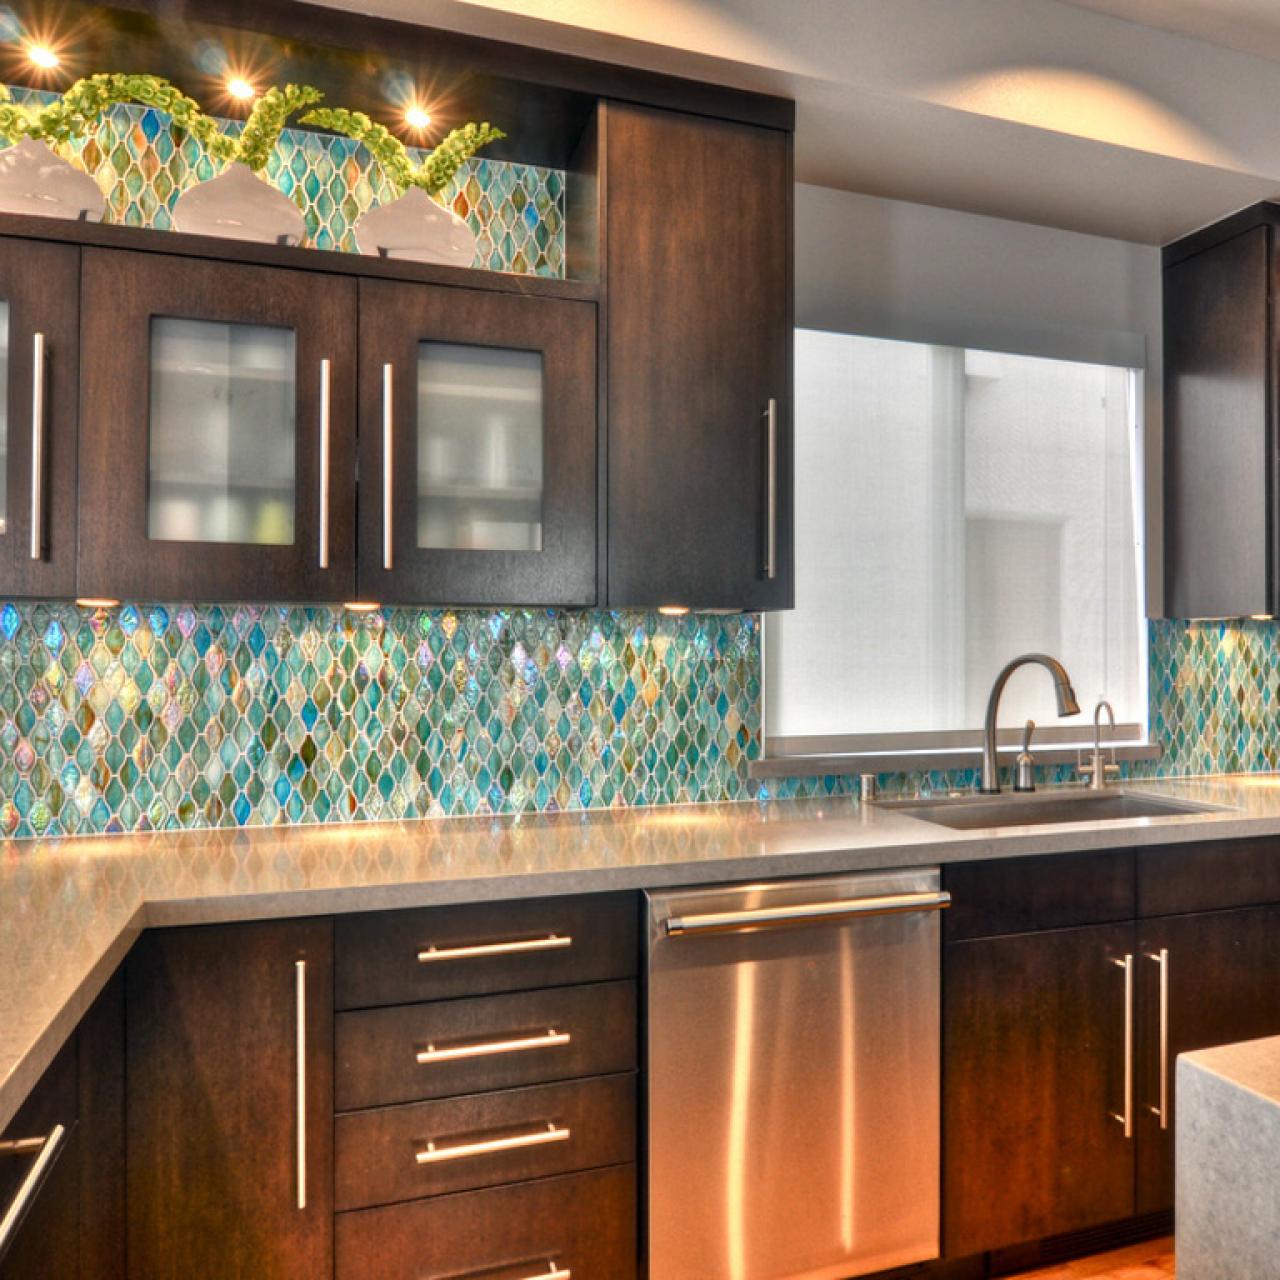 Glass Backsplash Ideas: Pictures & Tips From HGTV